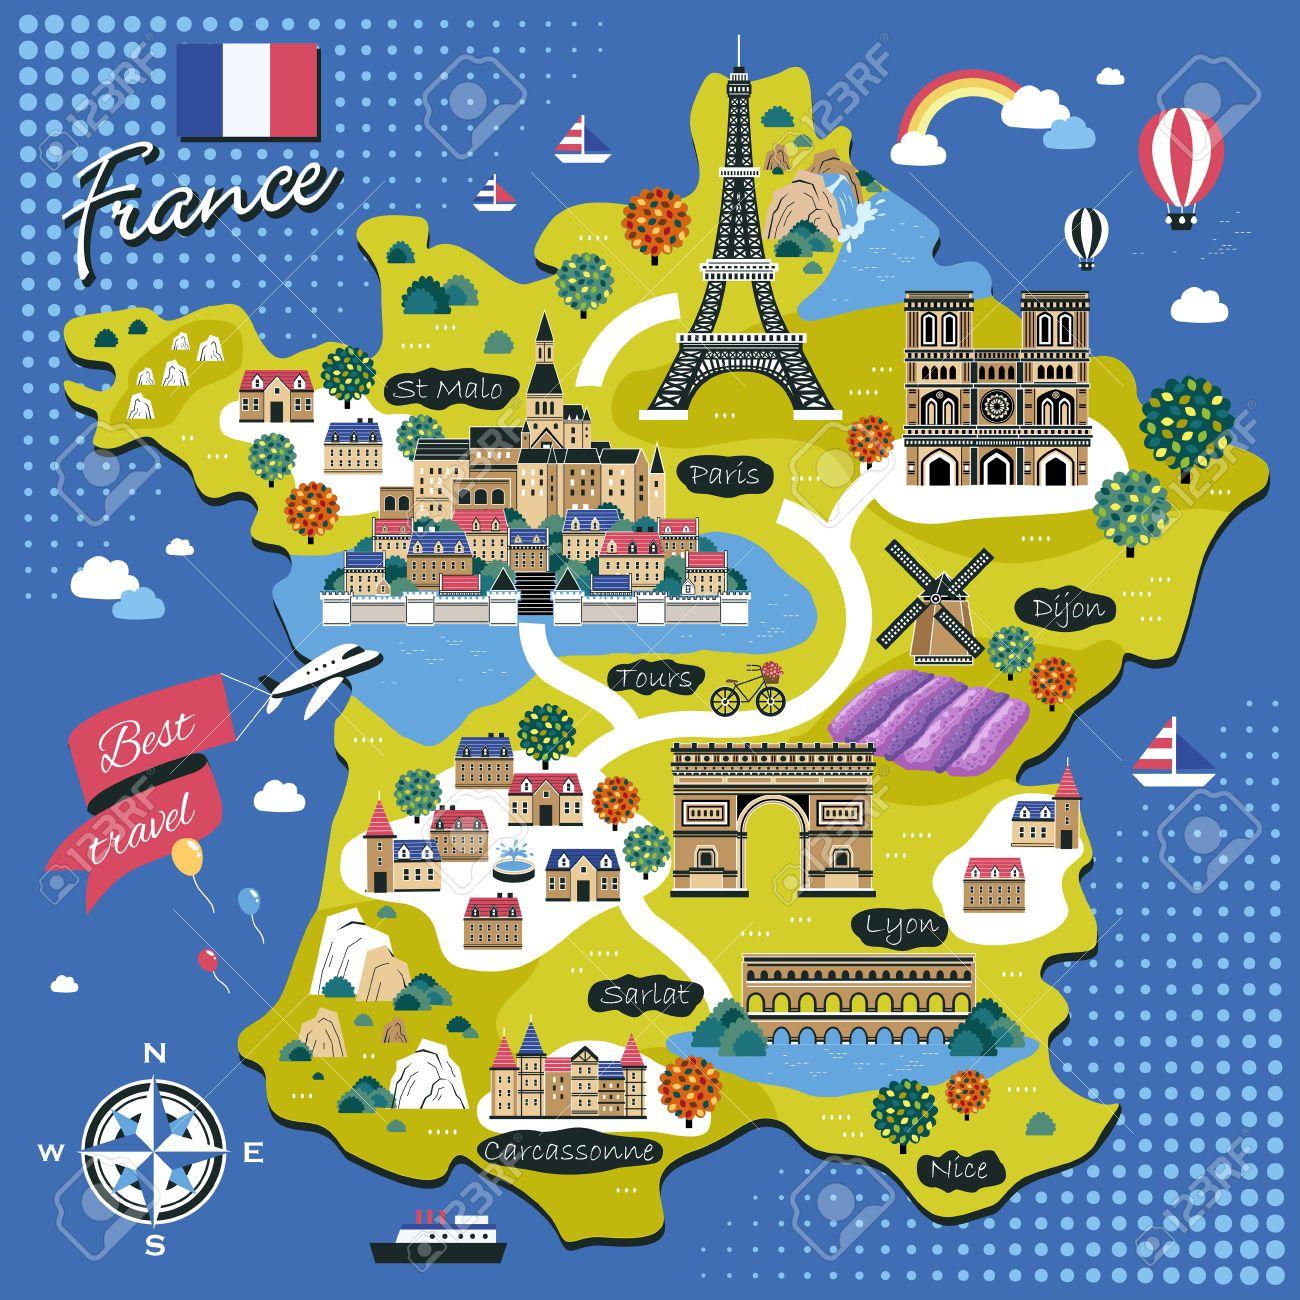 France Tourist Attractions Map | Images and Photos finder